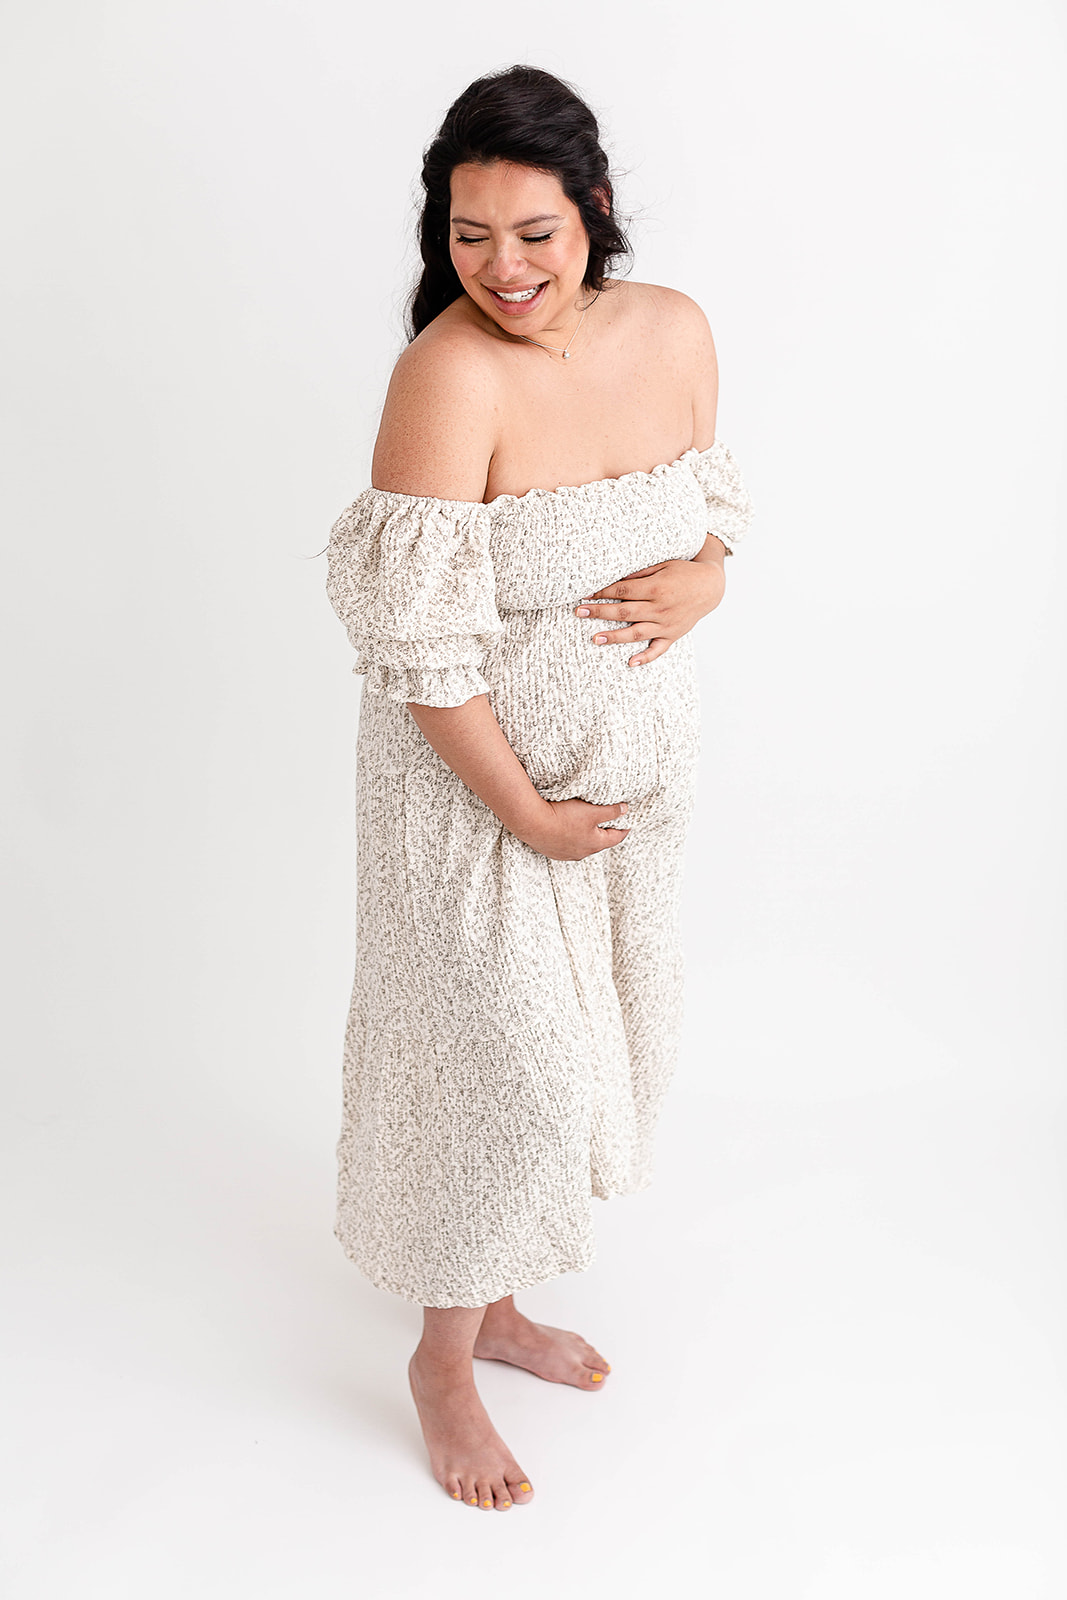 A mother to be laughs down her shoulder while standing in a studio holding her bump